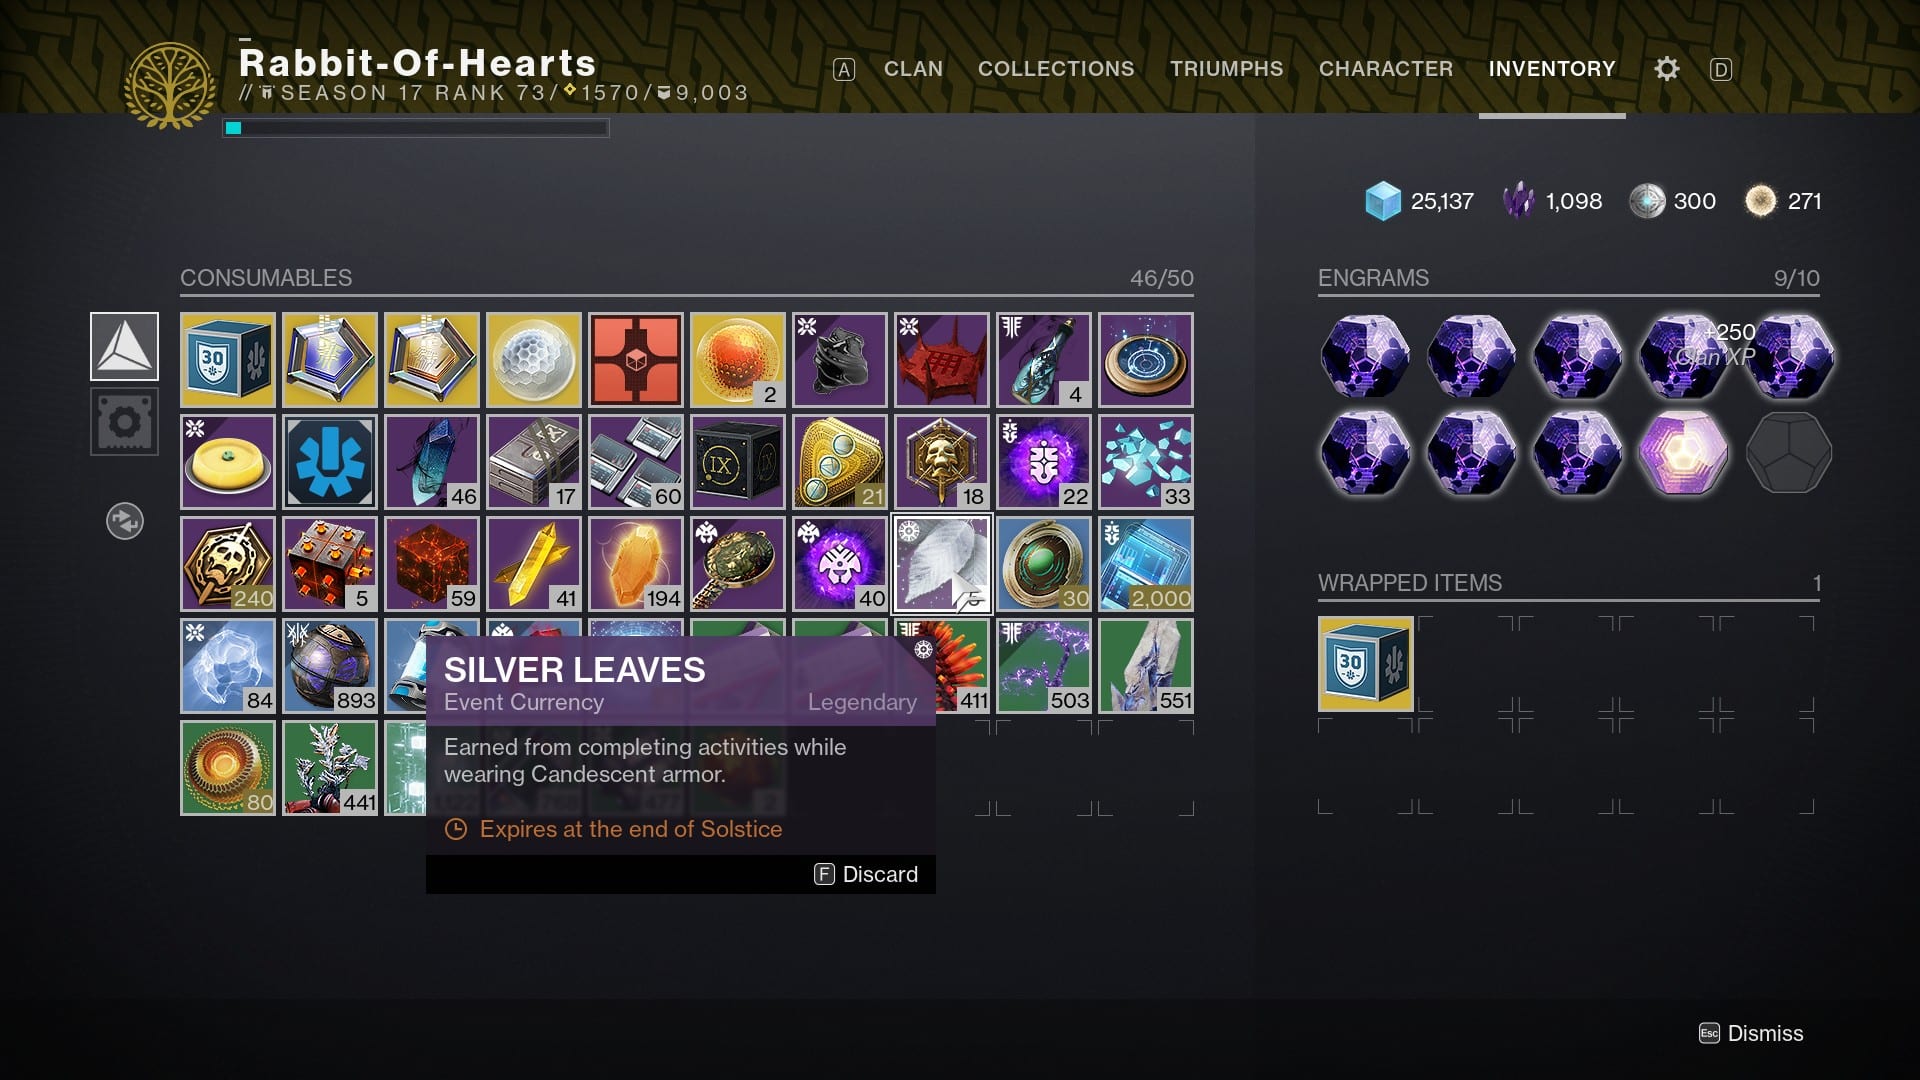 How to get Silver Leaves in Destiny 2 - Silver Leaves in Inventory